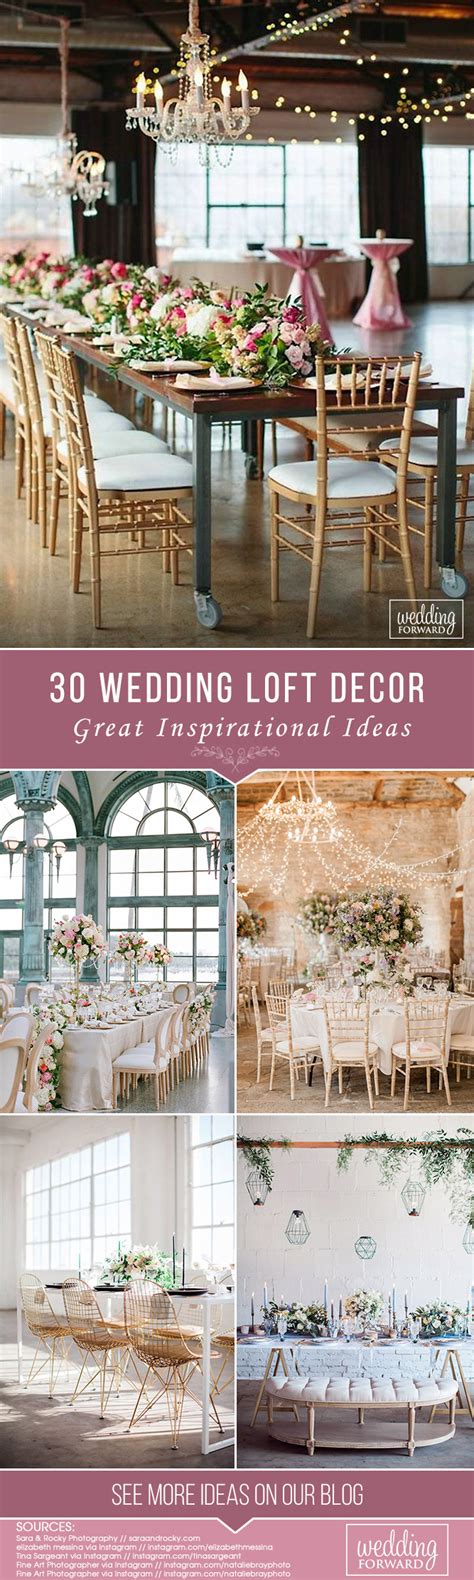 Get inspired by these creative loft bed ideas for kids' rooms. 30 Lovely Wedding Loft Decorating Ideas | Loft decor ...